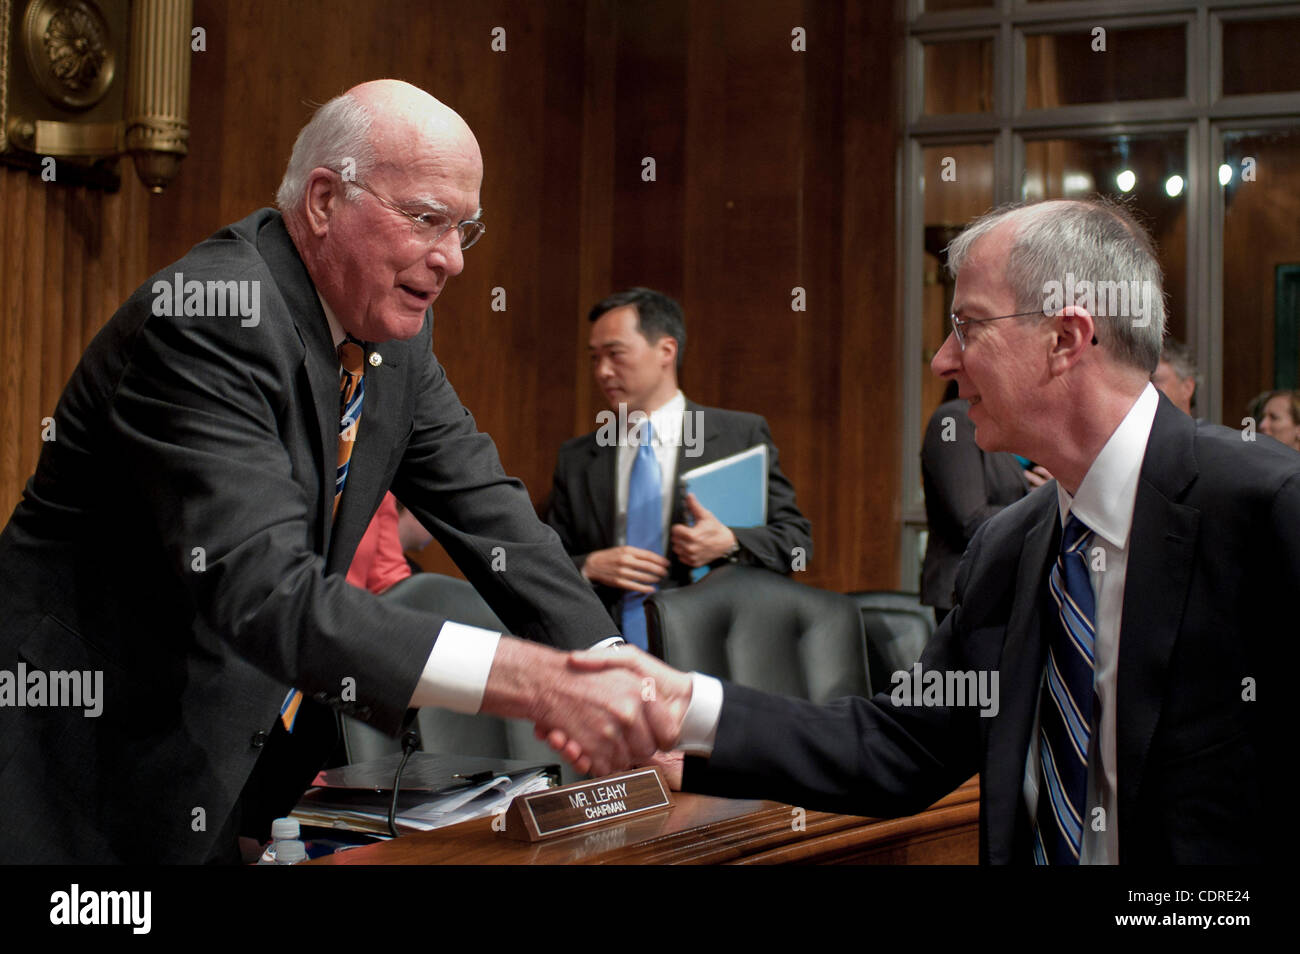 May 10, 2011 - Washington, District of Columbia, U.S. - GUY ''BUD'' TRIBBLE, vice president of software technology at Apple, Inc., is greeted by Senator PATRICK LEAHY (D- VT) before testifying before a Senate Privacy, Technology and the Law Subcommittee hearing on ''Protecting Mobile Privacy'' on Ca Stock Photo